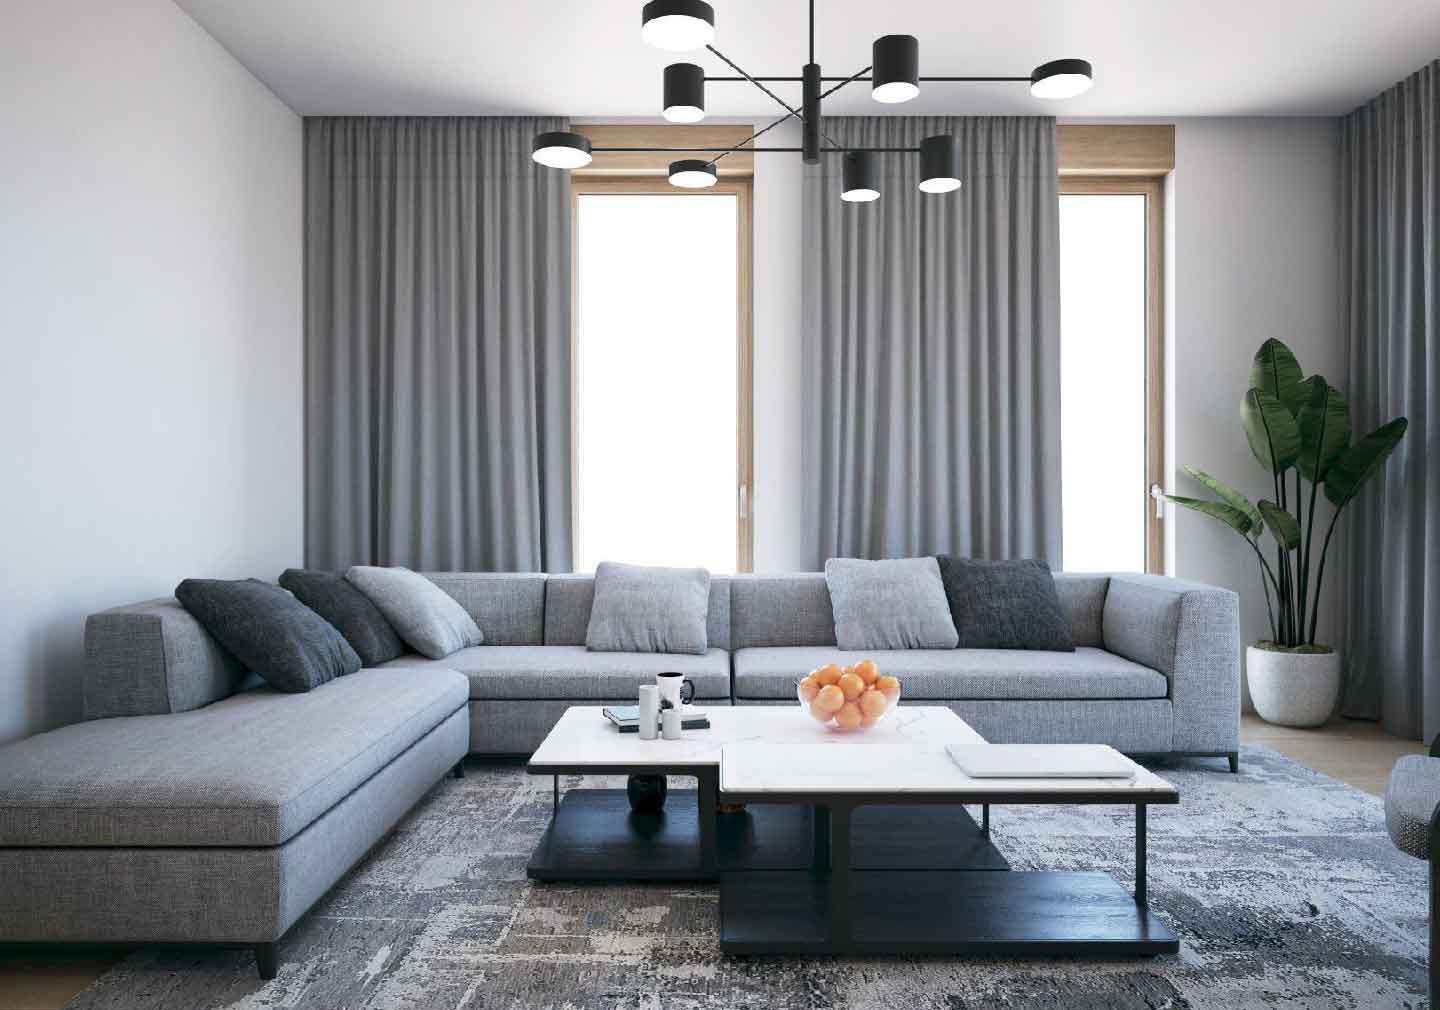 living room interior designs - Do’s and Don’ts for your living room space
